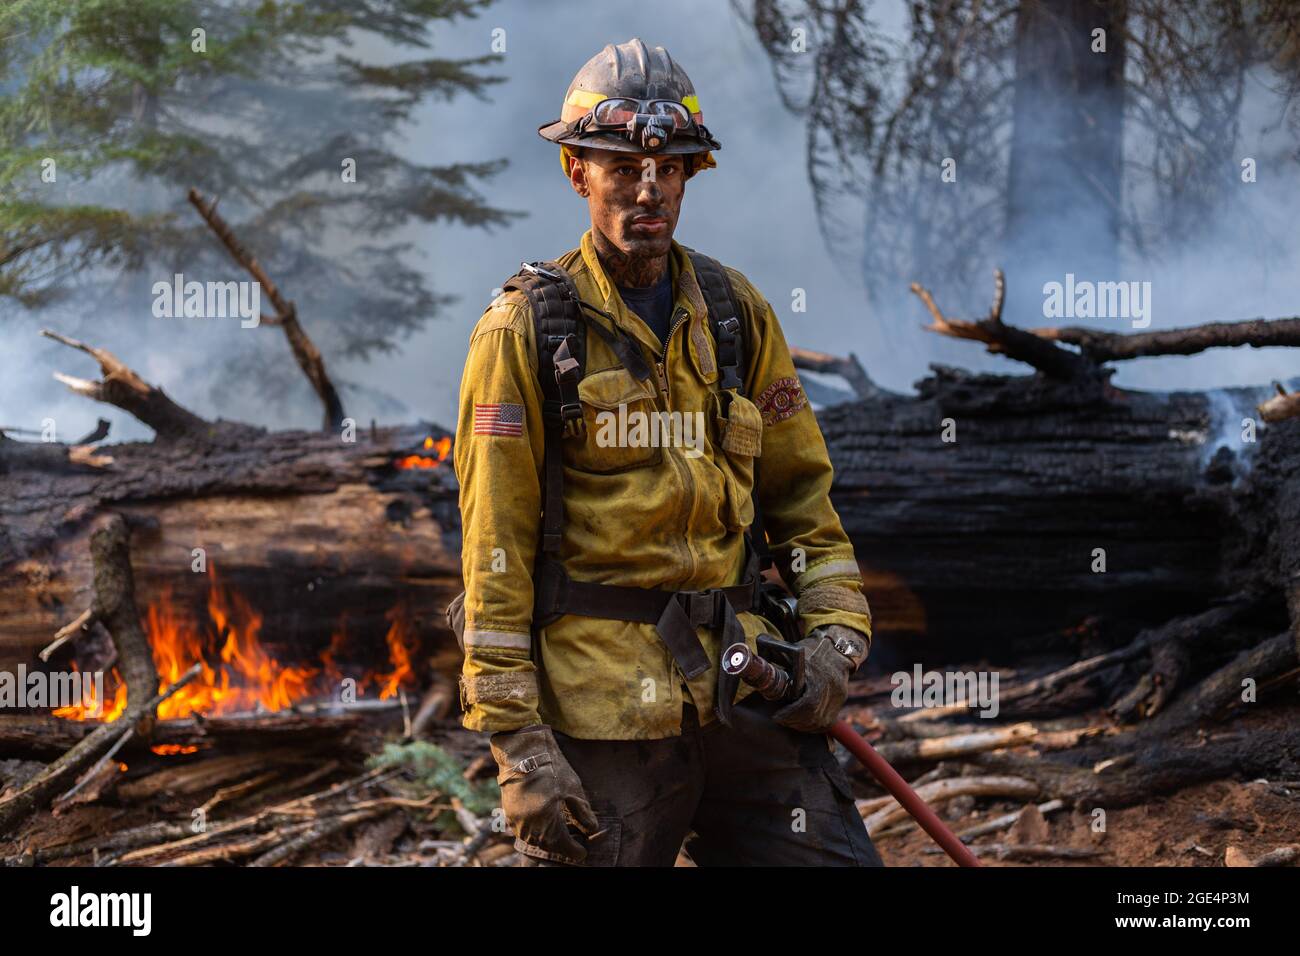 Chester, Ca, USA. 13th Aug, 2021. Firefighter Grant Kemp, 33, poses for a portrait after hosing down the large tree in the background and battling the Dixie Fire near Chester, CA on August 13, 2021. Kemp is a former contestant on The Bachelorette. (Photo by Daniel Brown/Sipa USA) Credit: Sipa USA/Alamy Live News Stock Photo